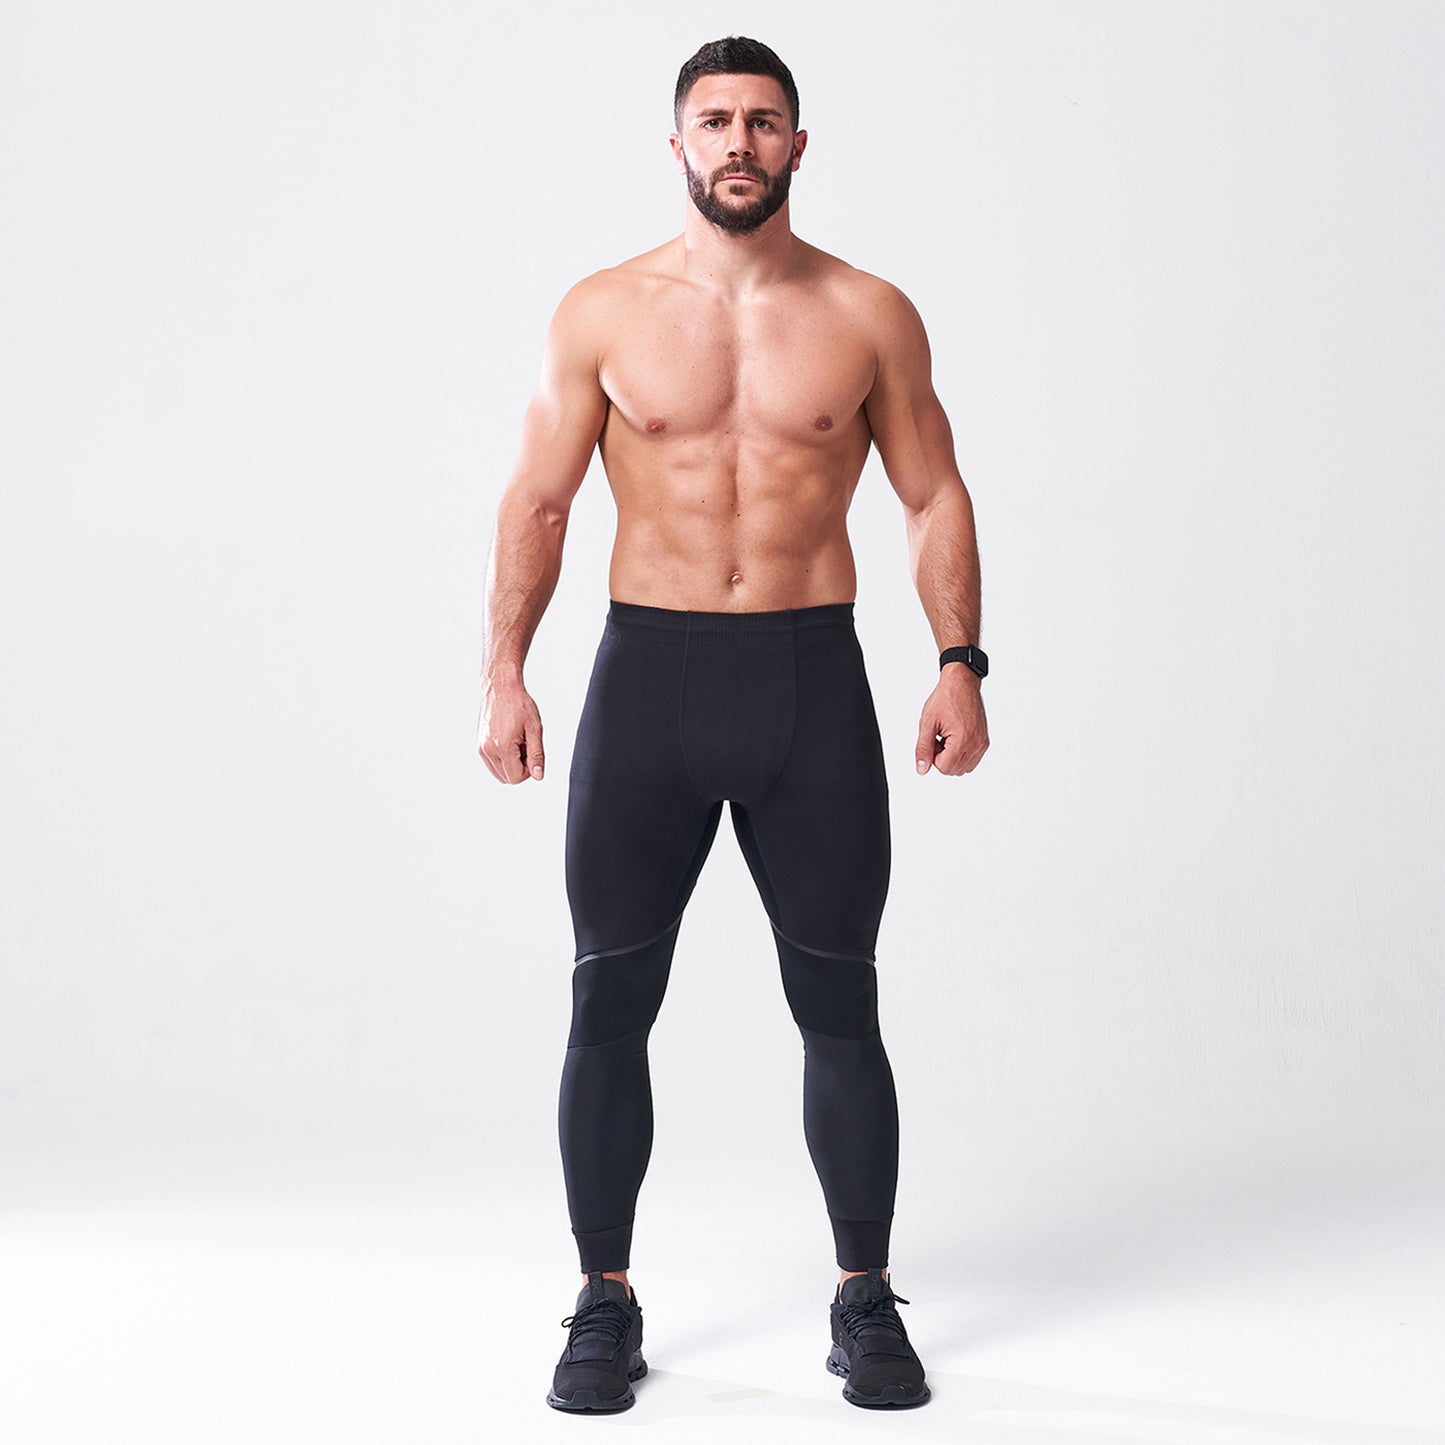 squatwolf-gym-wear-lab360-impact-tight-black-workout-tights-for-men